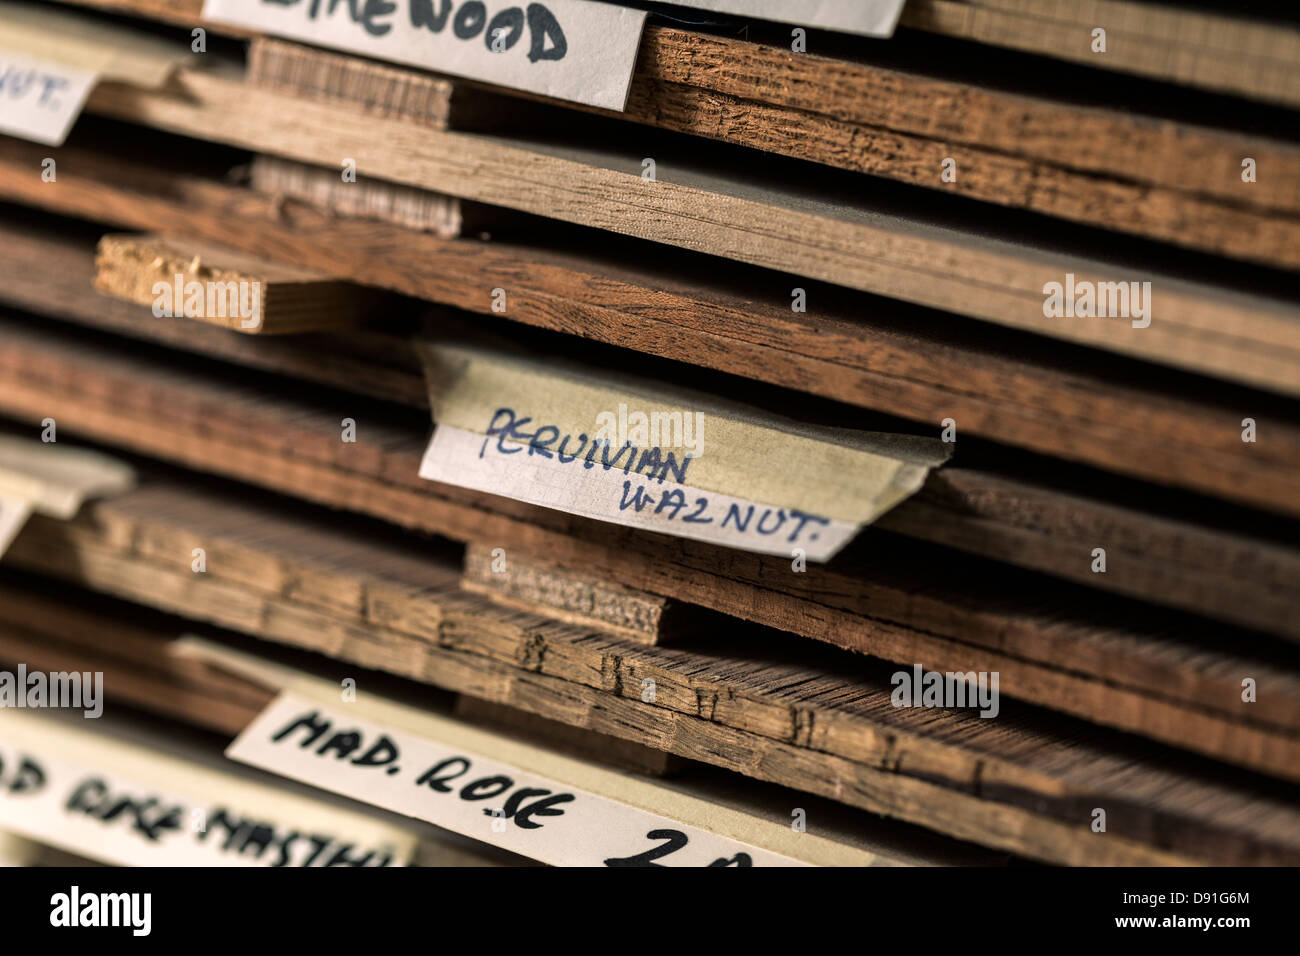 Close up of labels on different types of wood used to make acoustic guitars Stock Photo